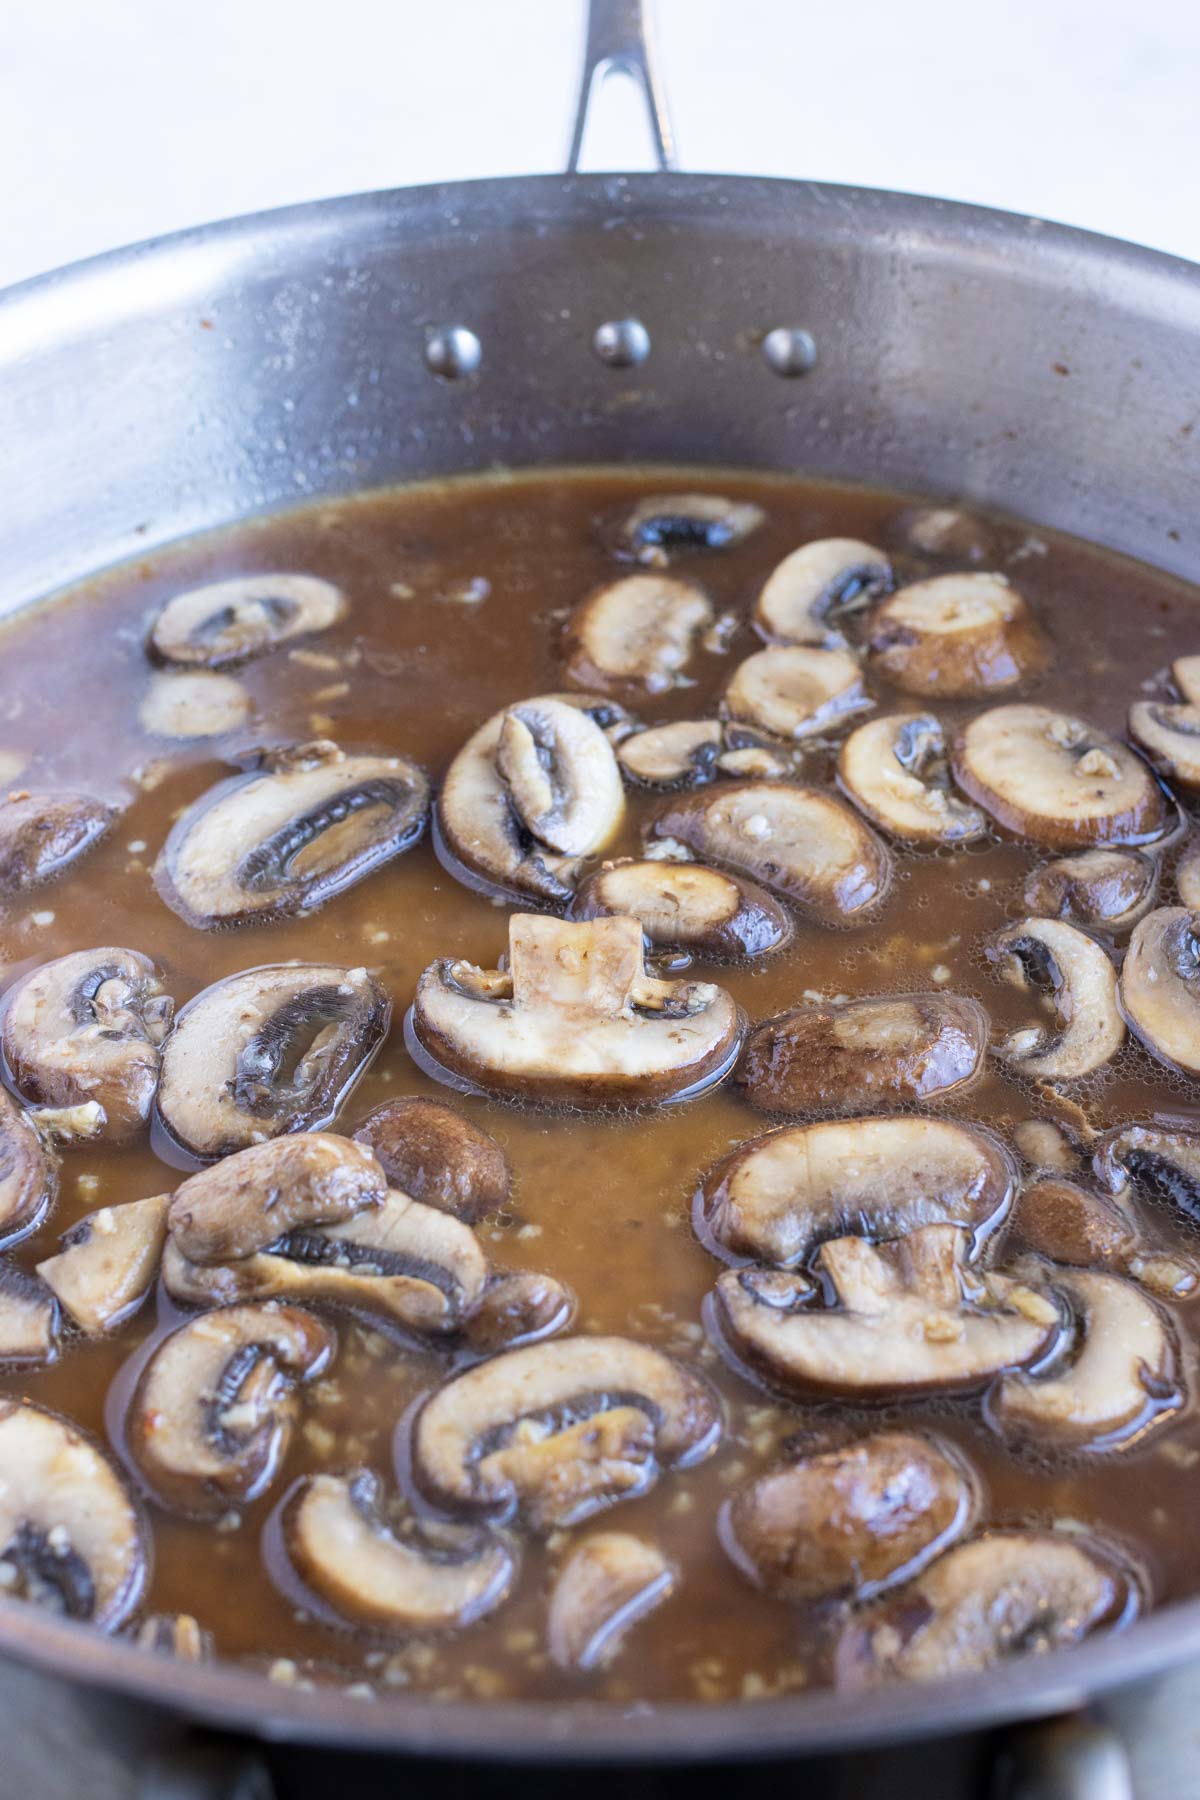 Mushrooms and liquids are cooked on the stove.